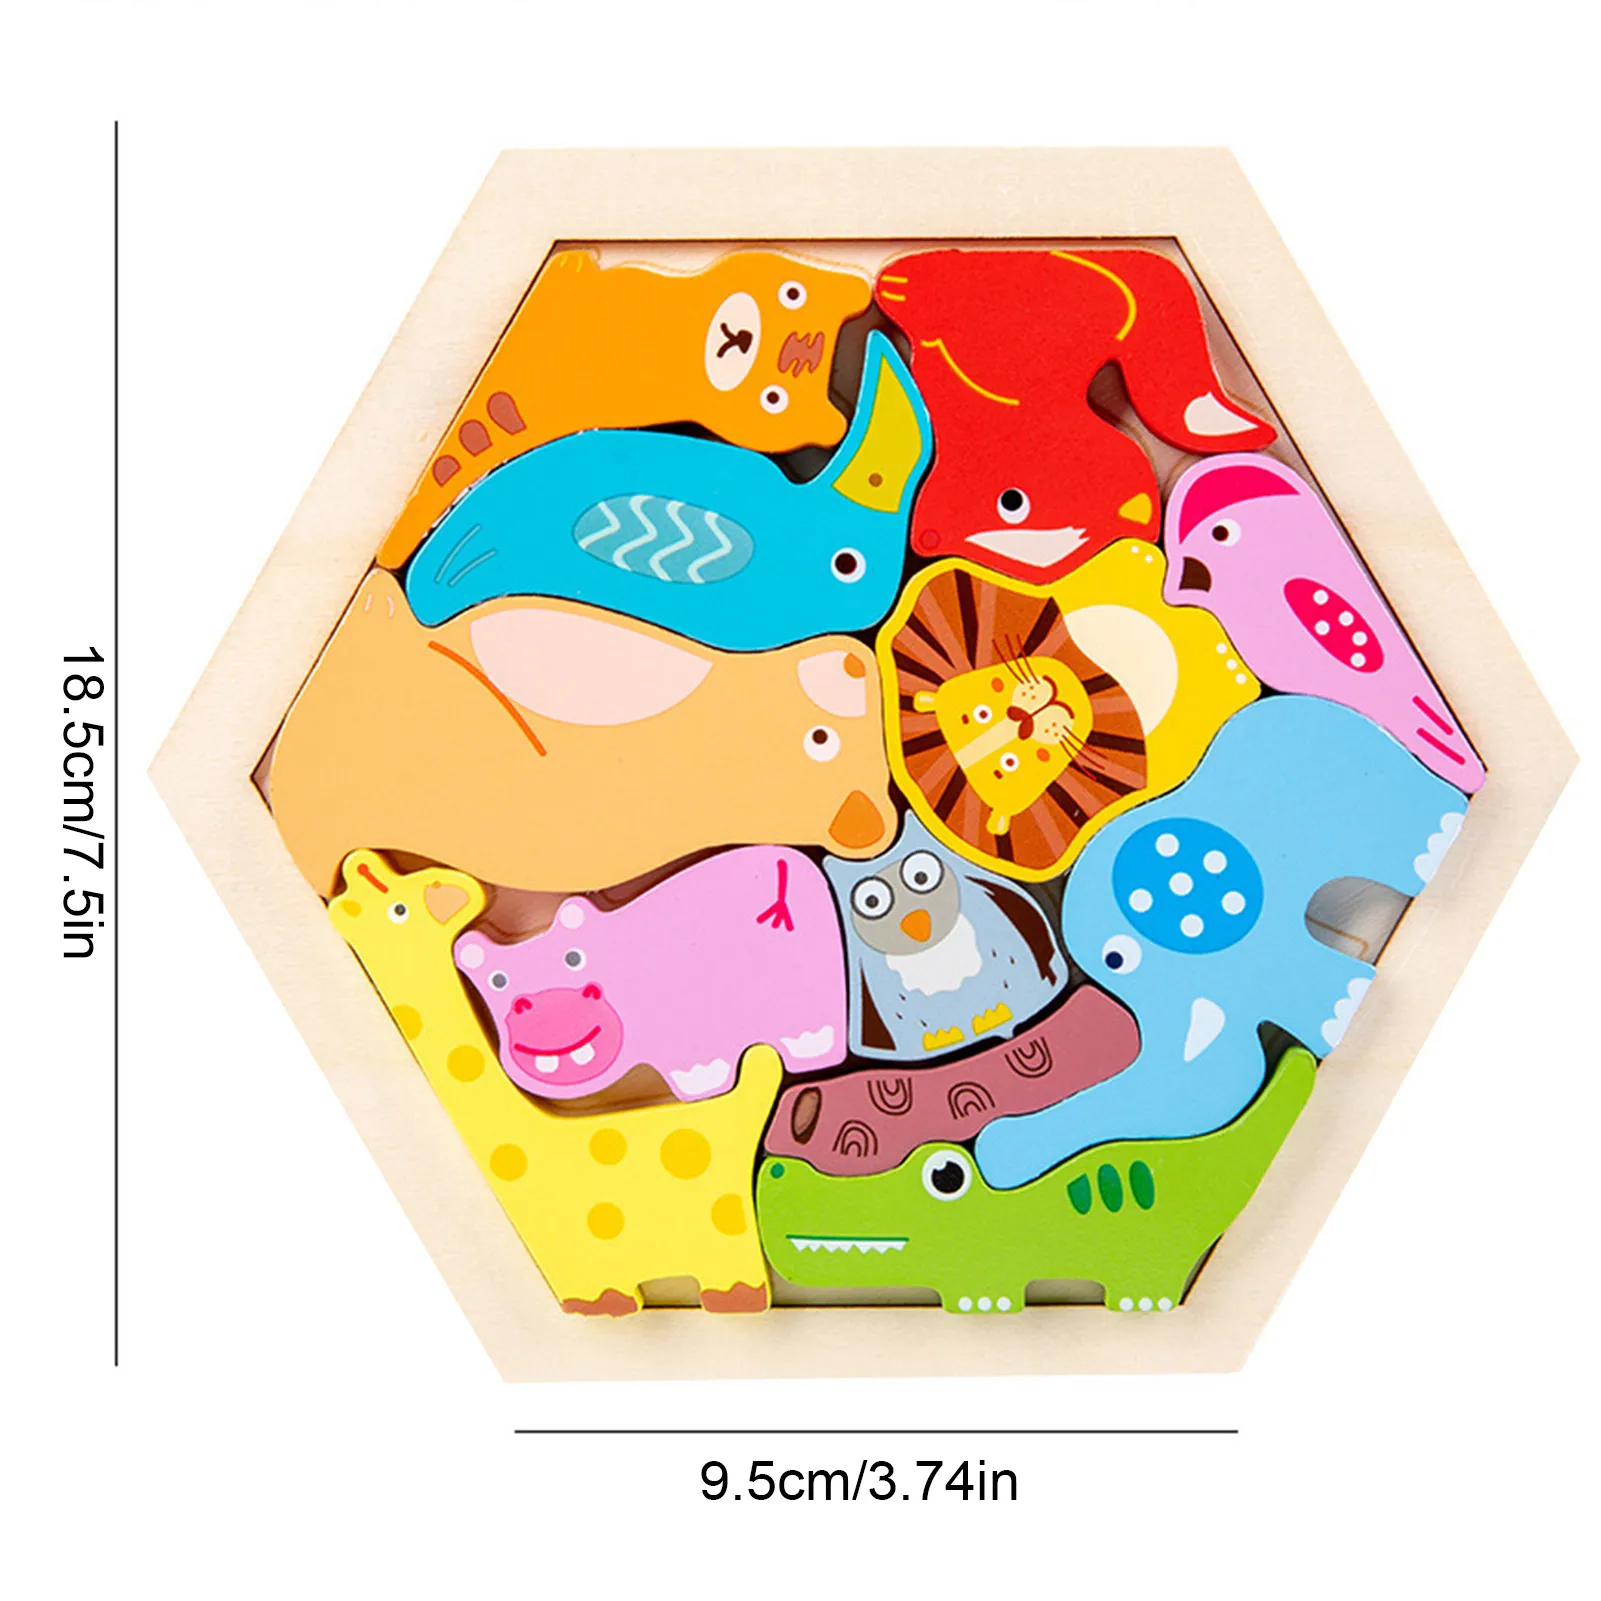 Cartoon Blocks Toddler Jigsaw Puzzles For Toddler Wooden Puzzles With And Burr-free For Toddler Educational Developmental Toys images - 6